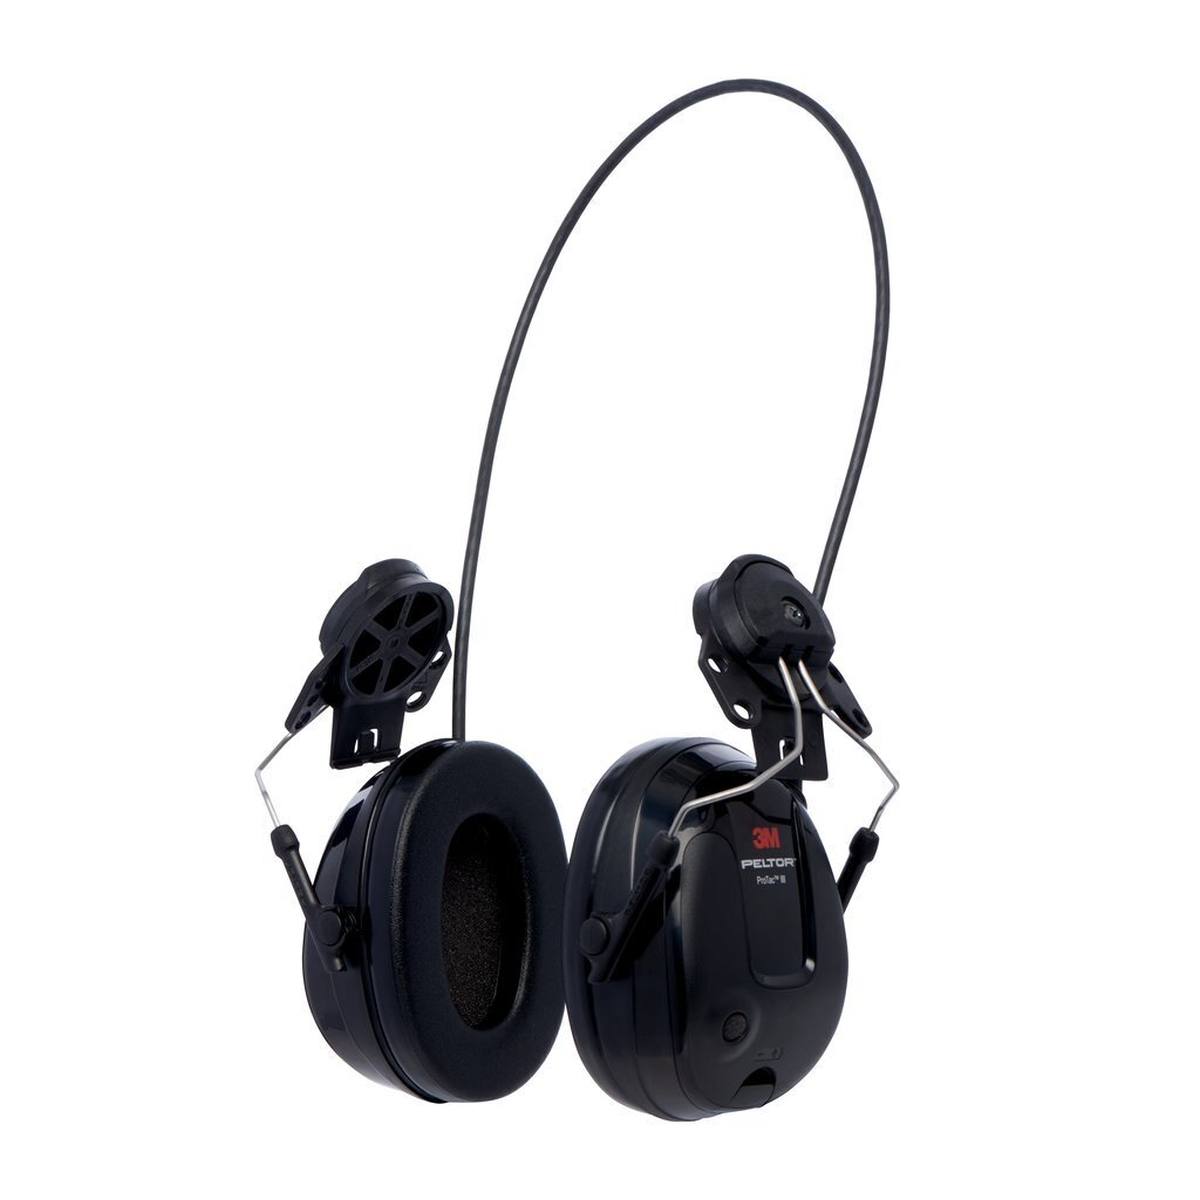 3M PELTOR ProTac III Slim hearing protection headset, black, helmet version, with active, level-dependent attenuation technology for perceiving ambient noise, SNR=25 dB, black